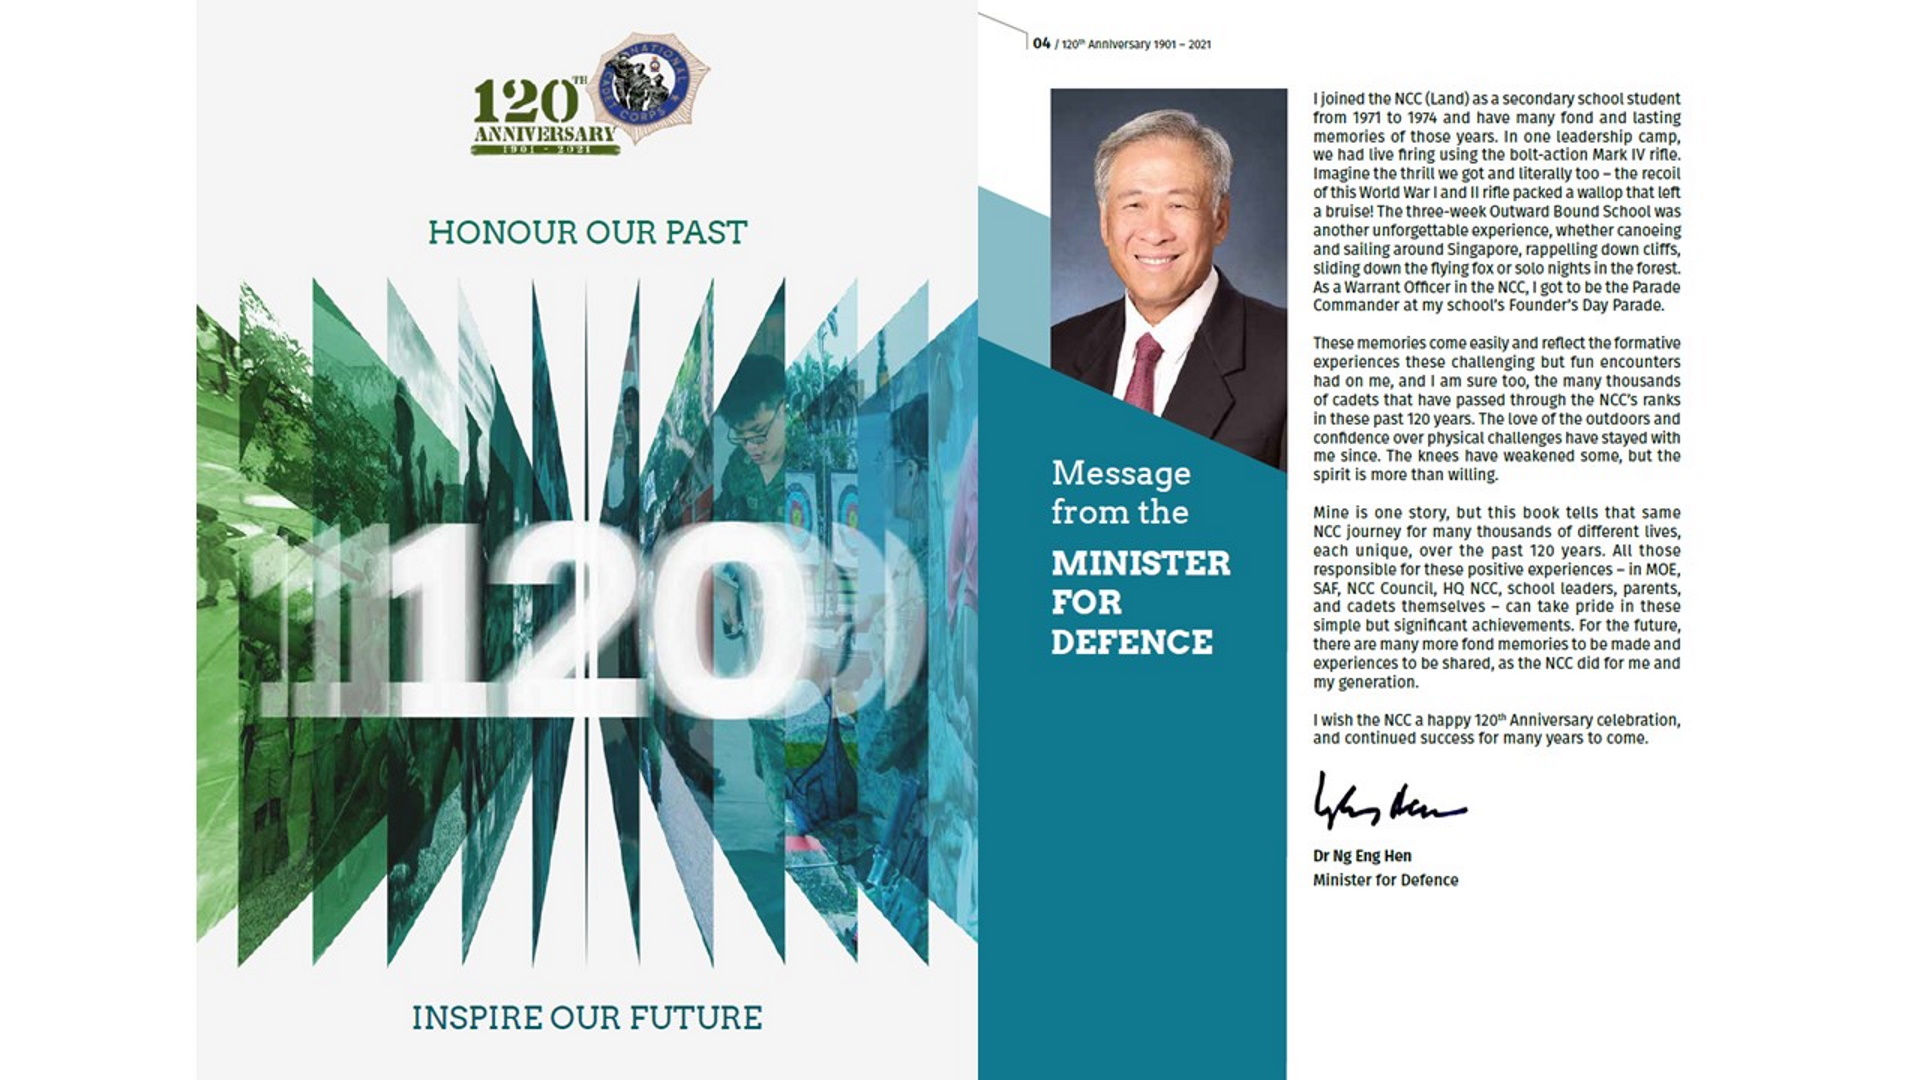 A screengrab of the 120th anniversary heritage e-book, which chronicles the NCC's achievements over the past 120 years. It also features a foreword by Minister for Defence Dr Ng Eng Hen.